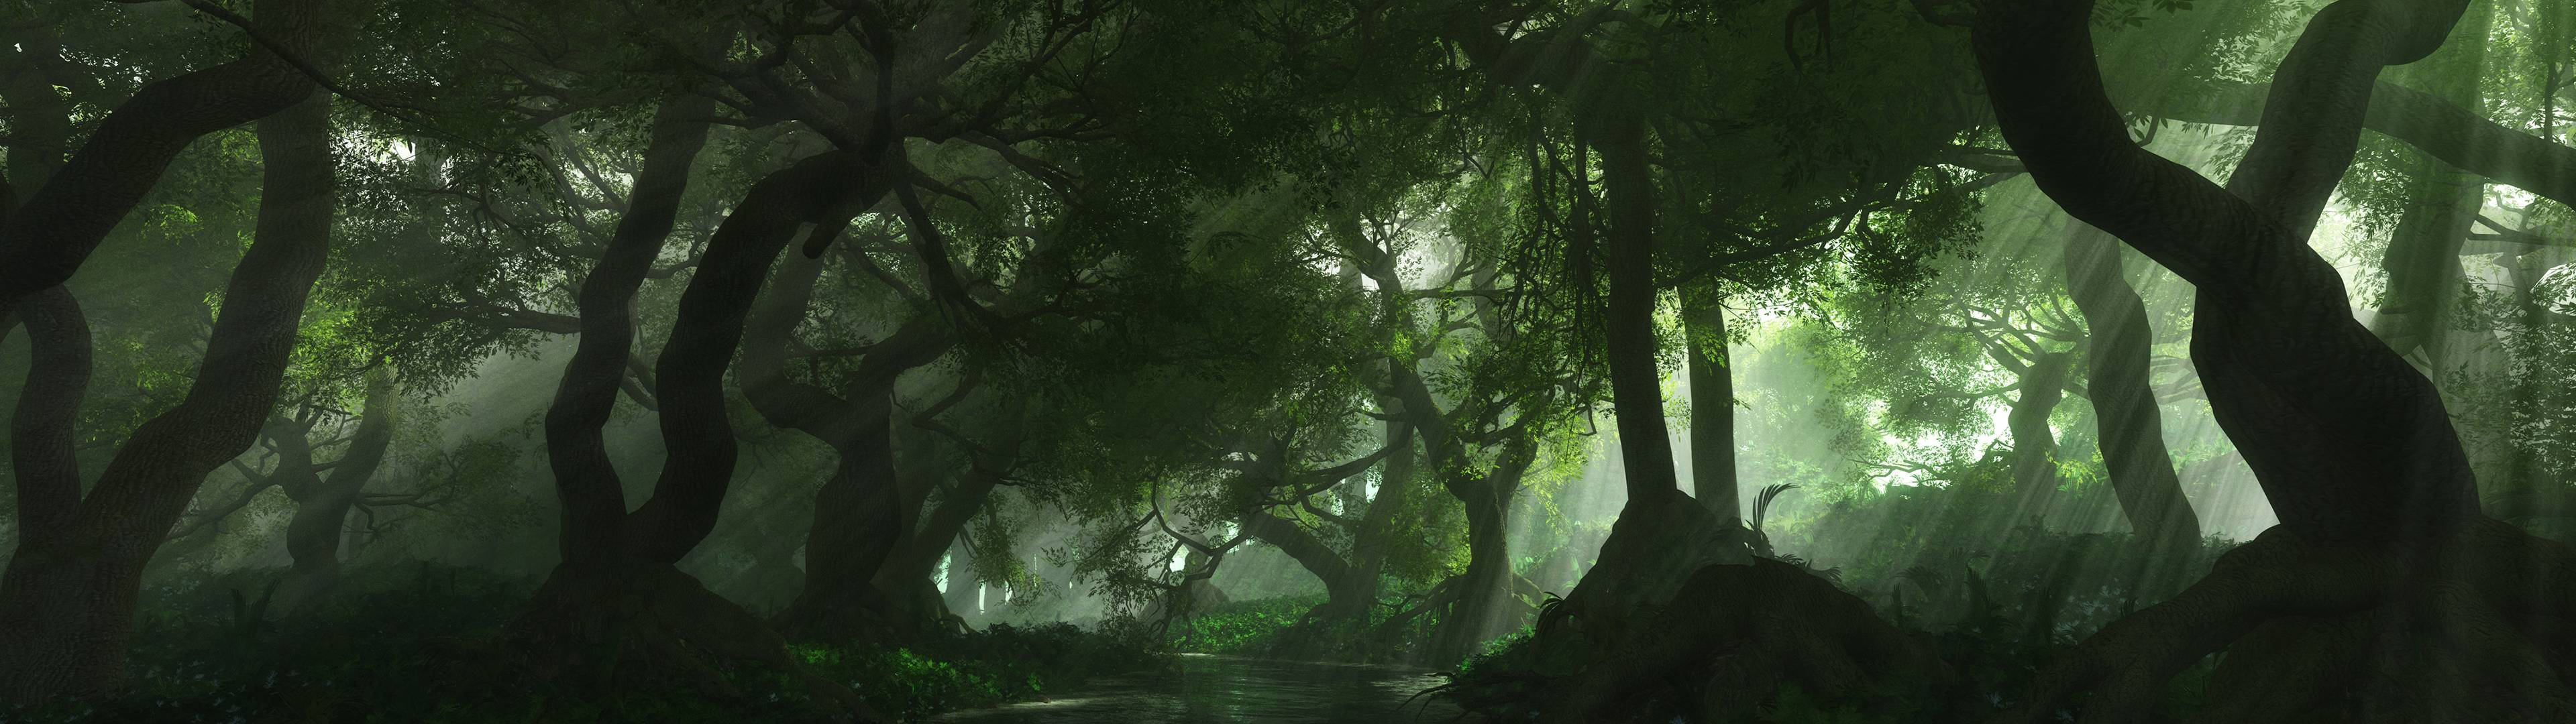 3840x1080 Hd Dual Monitor Forest Wallpaper